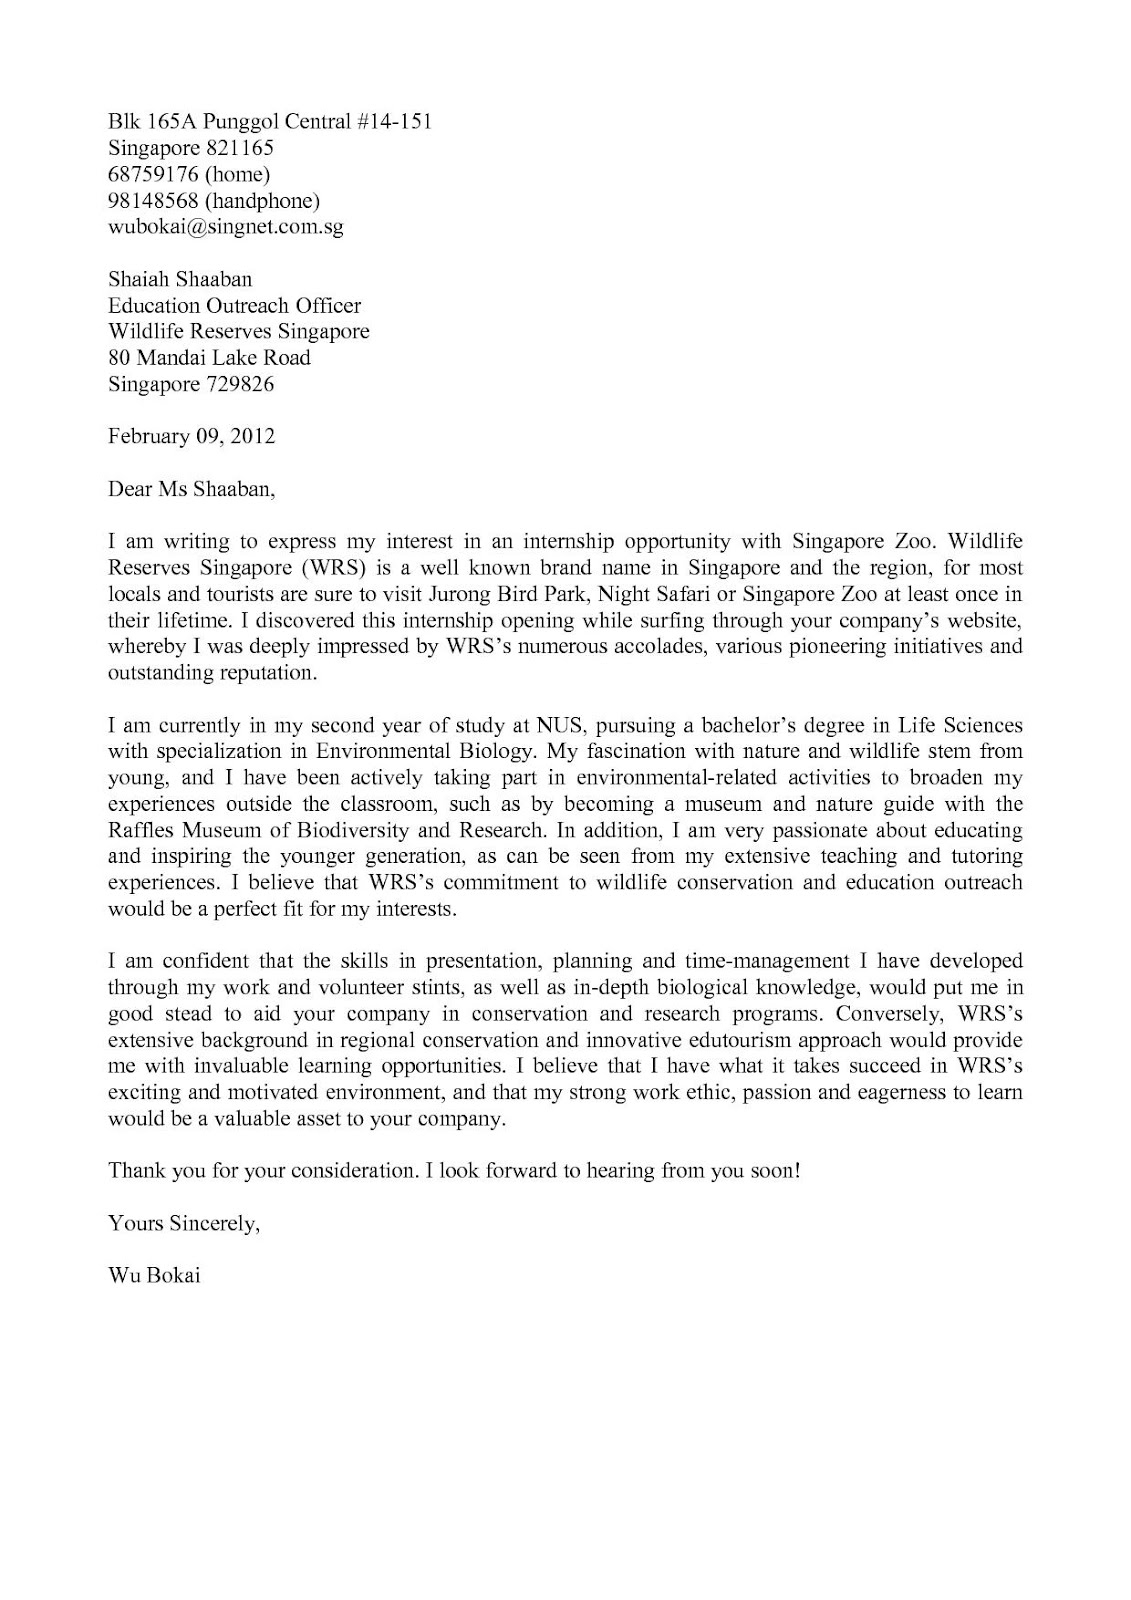 Admissions Counselor Cover Letter and Resume Examples